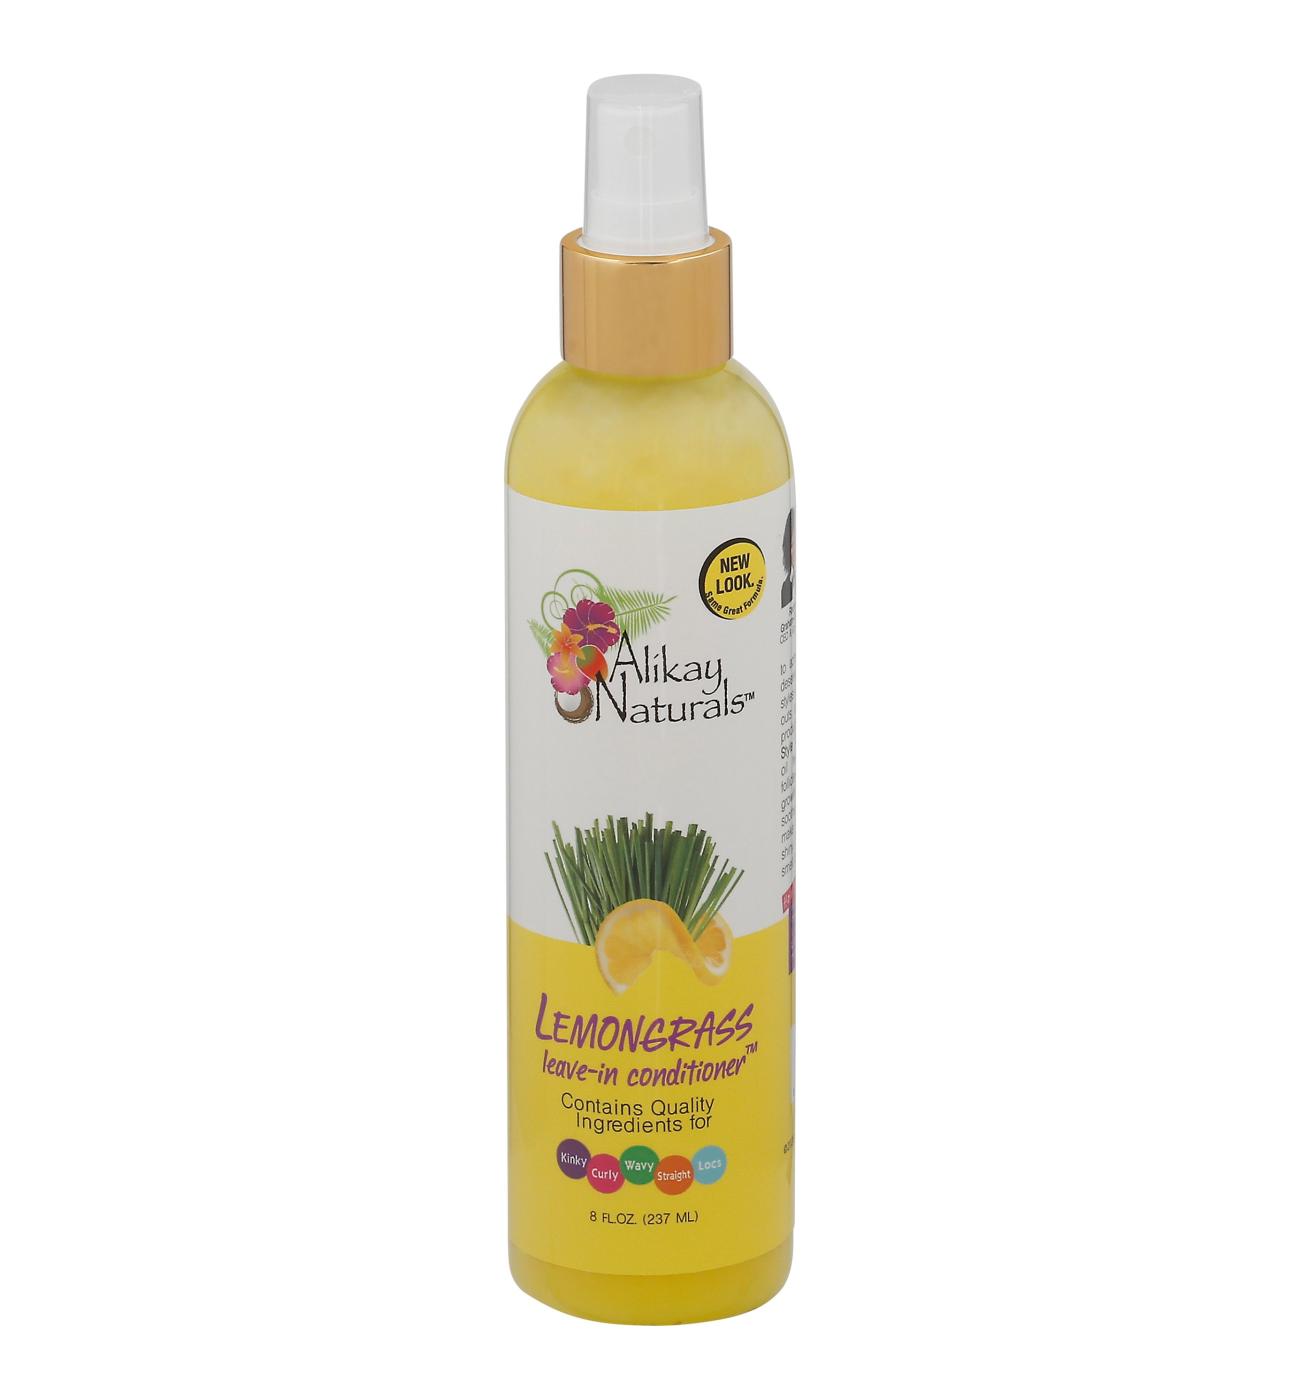 Alikay Naturals Leave-In Conditioner - Lemongrass; image 1 of 2